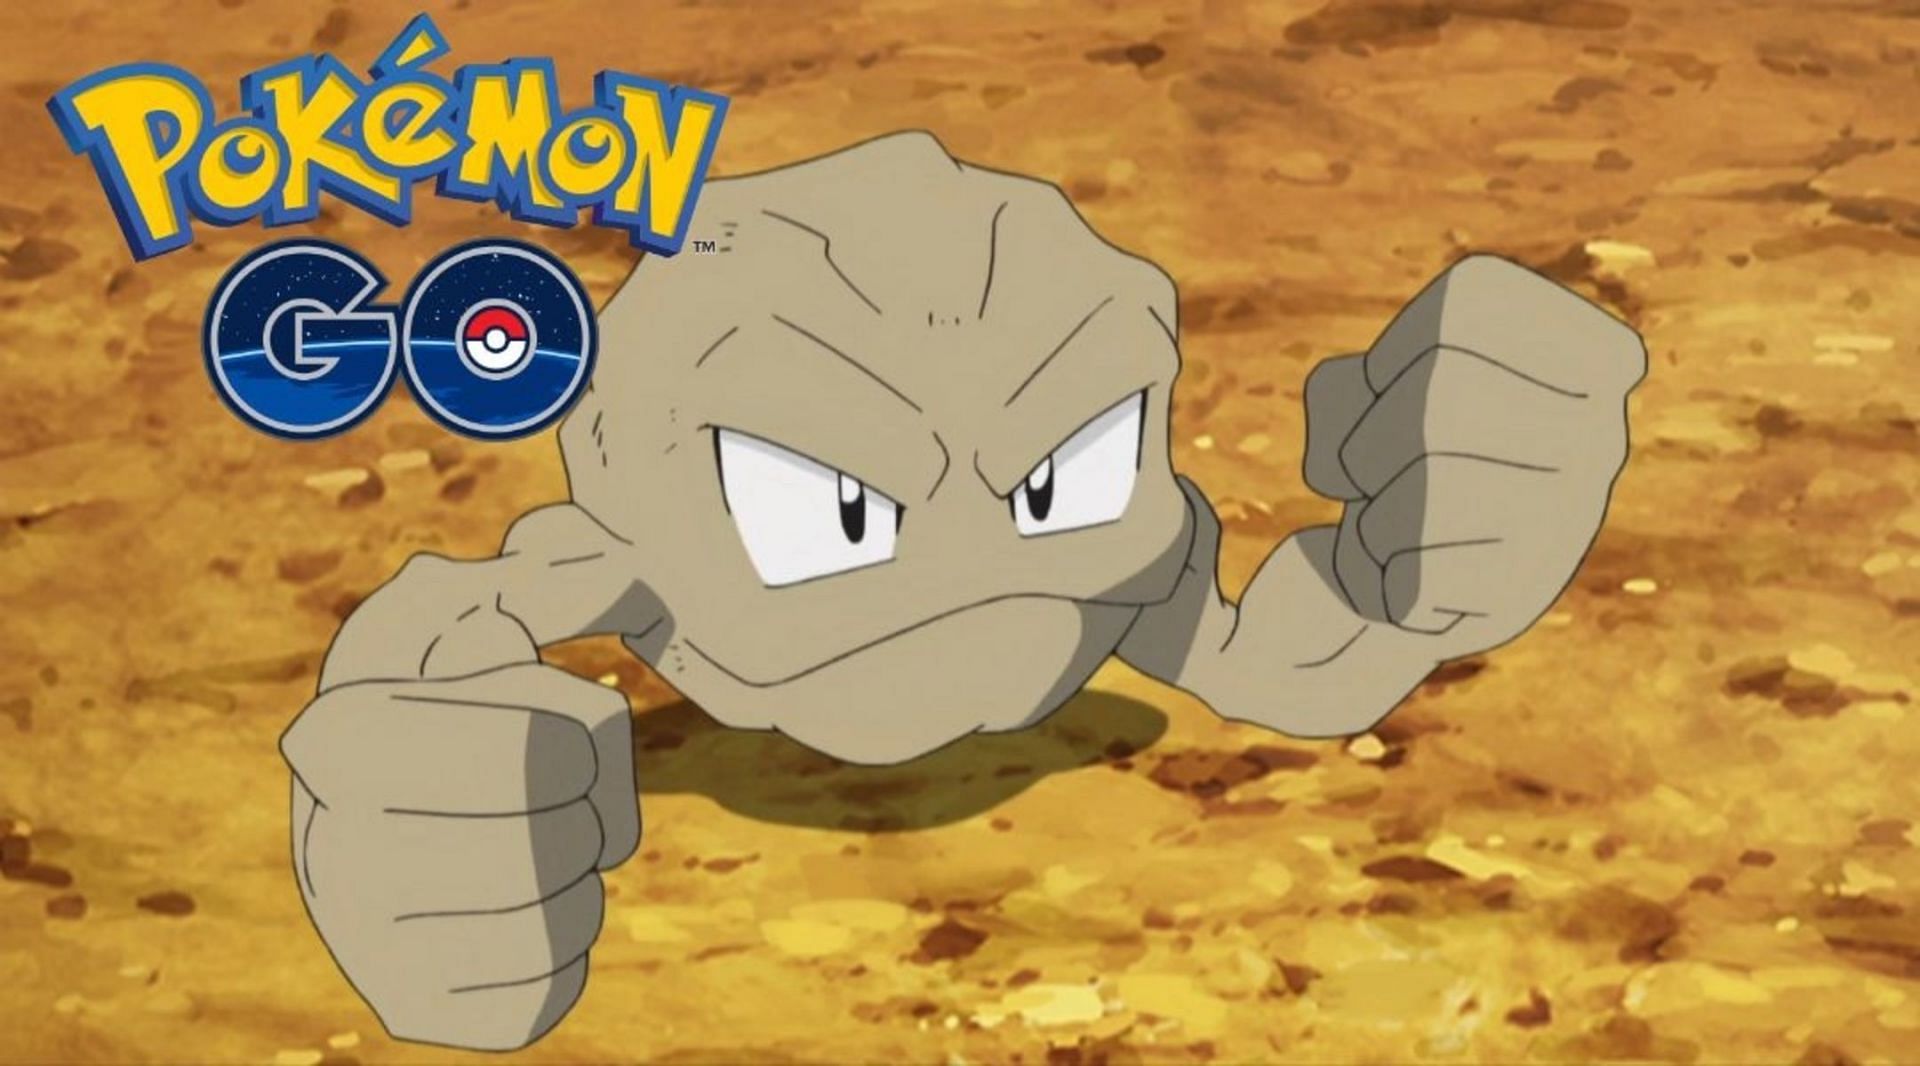 Geodude has appeared more often thanks to the Mountains of Power event (Image via The Pokemon Company)